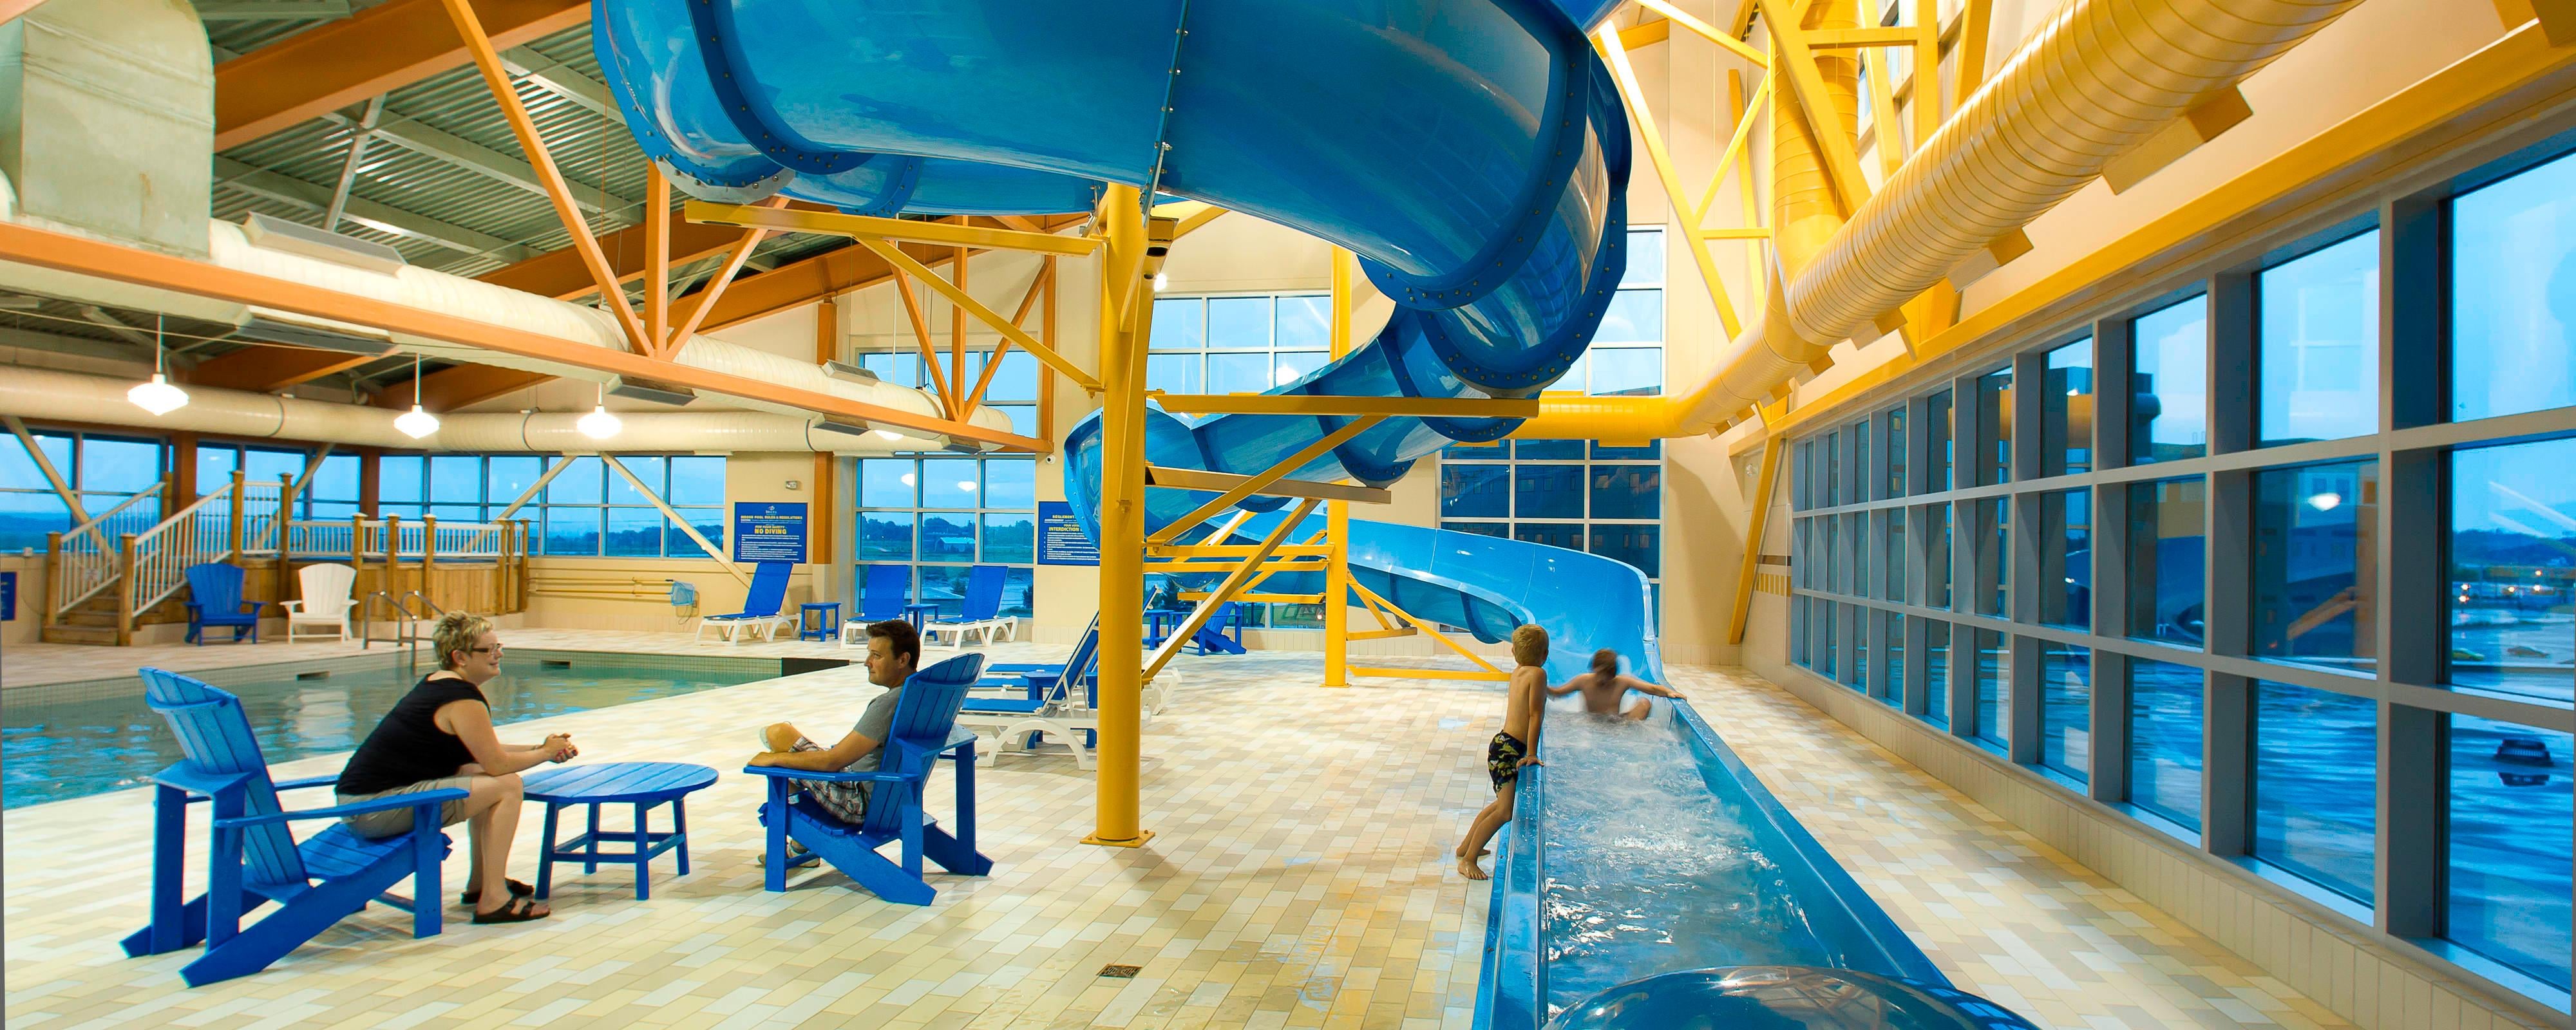 Moncton Hotels with Pool and Waterslide | Delta Hotels Beausejour